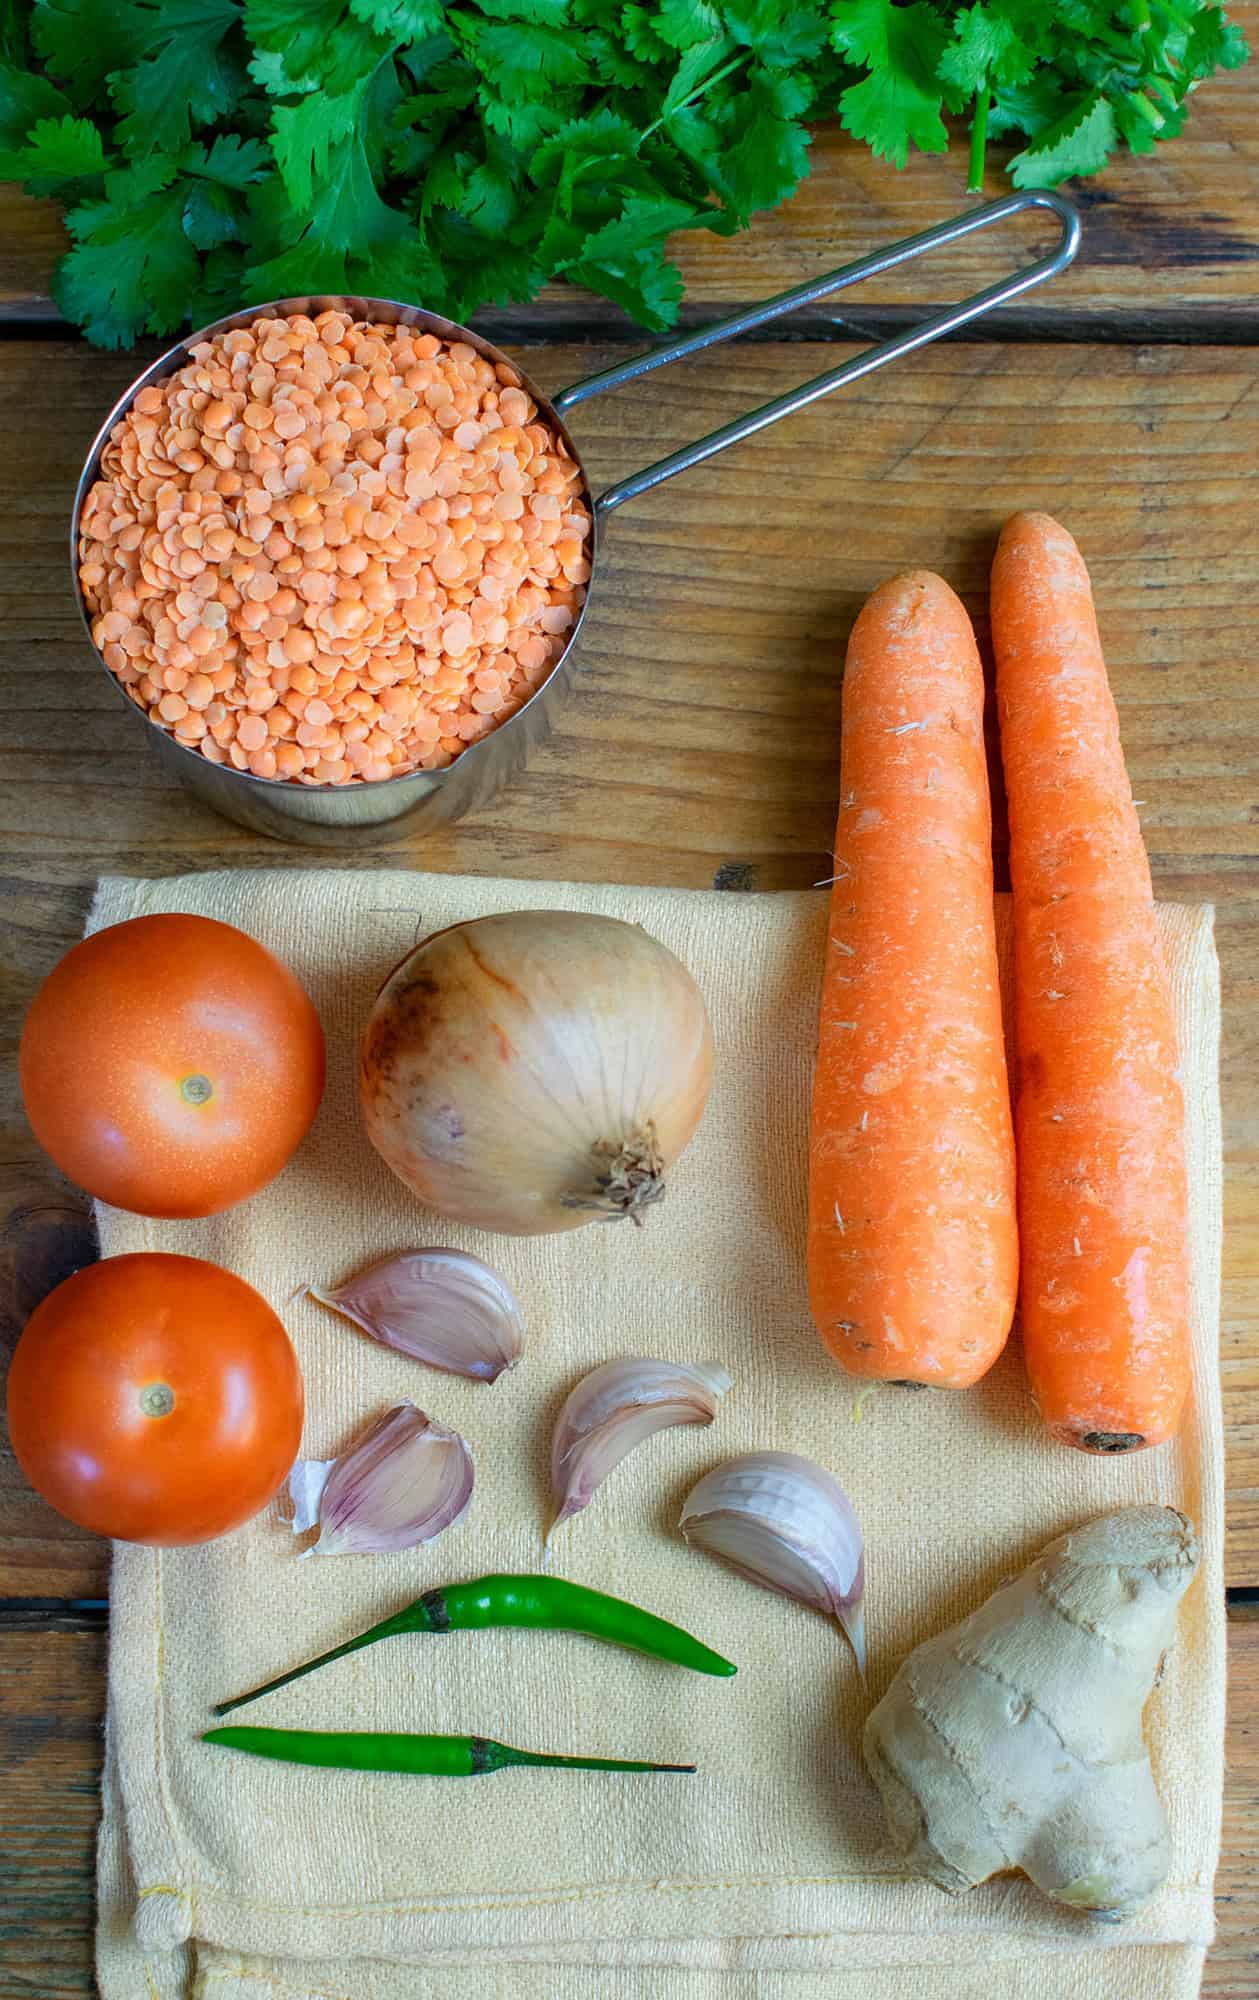 Ingredients laid out on an orange cloth, showing coriander, carrots, red split lentils, onion, tomatoes, garlic, ginger and green chillies.